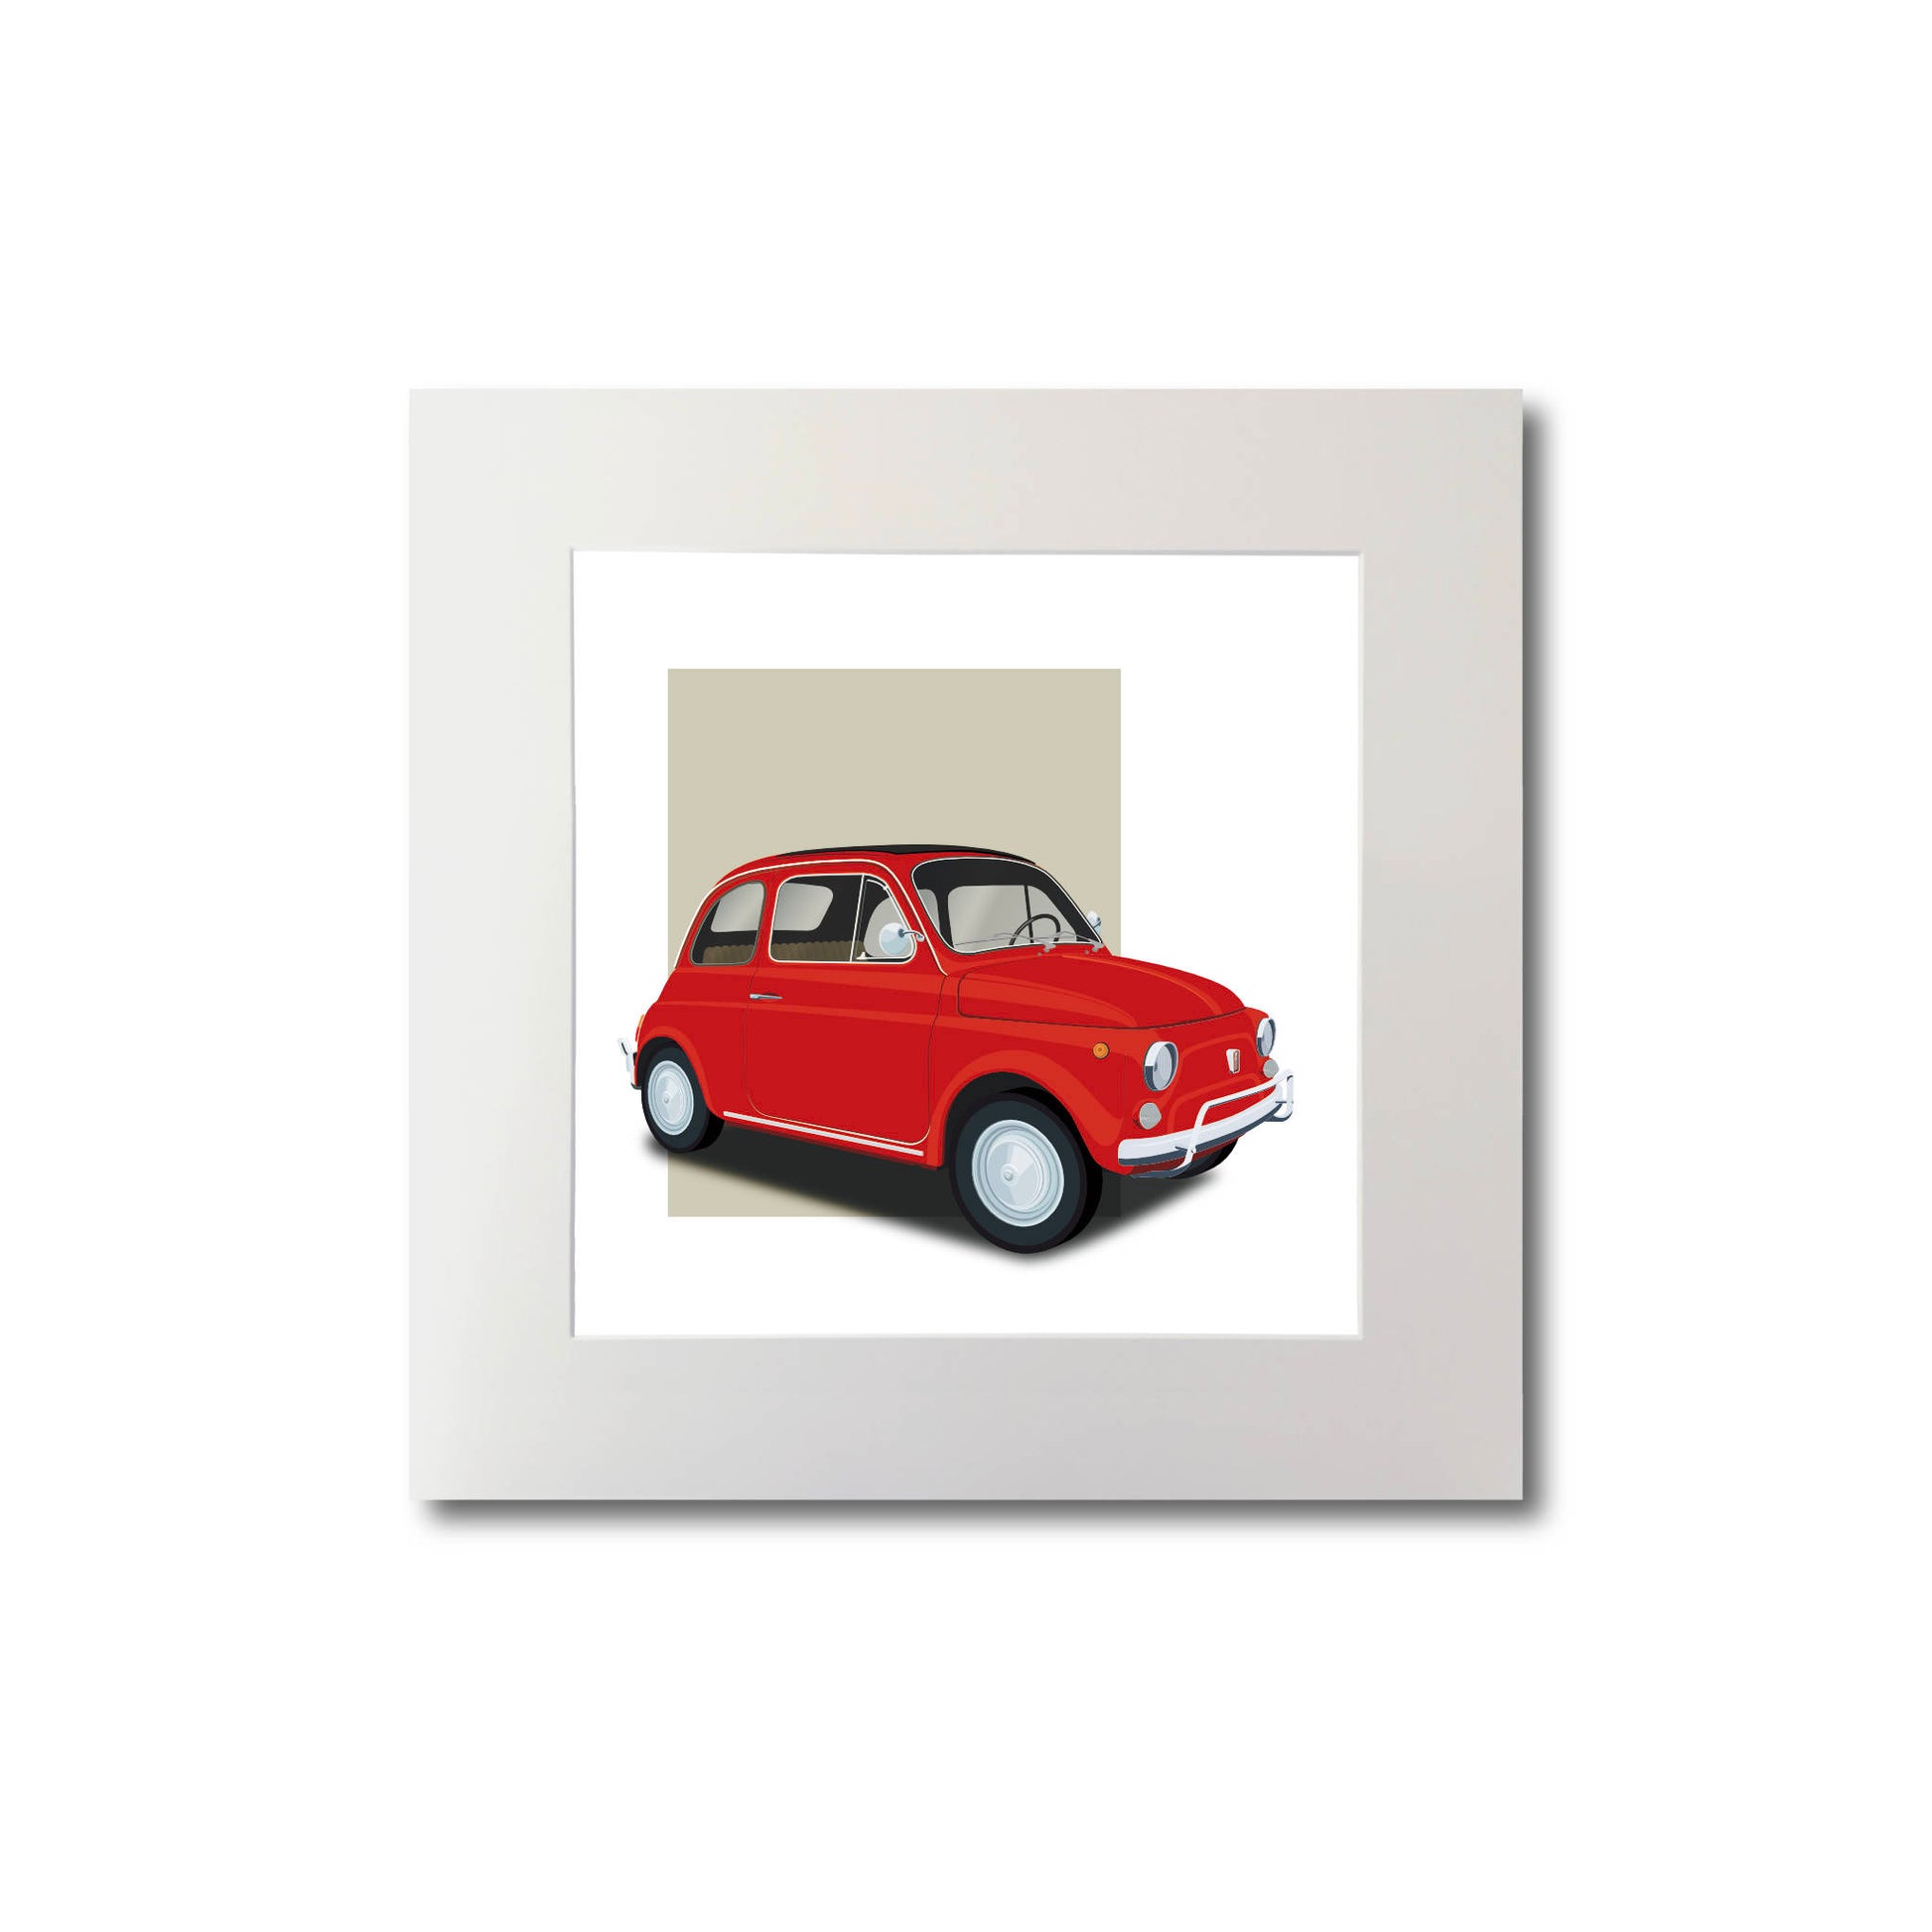 Modern illustration of the classic 1960s Fiat 500 Cinquecento in gorgeous red with dark background, measuring 20 x 20cm